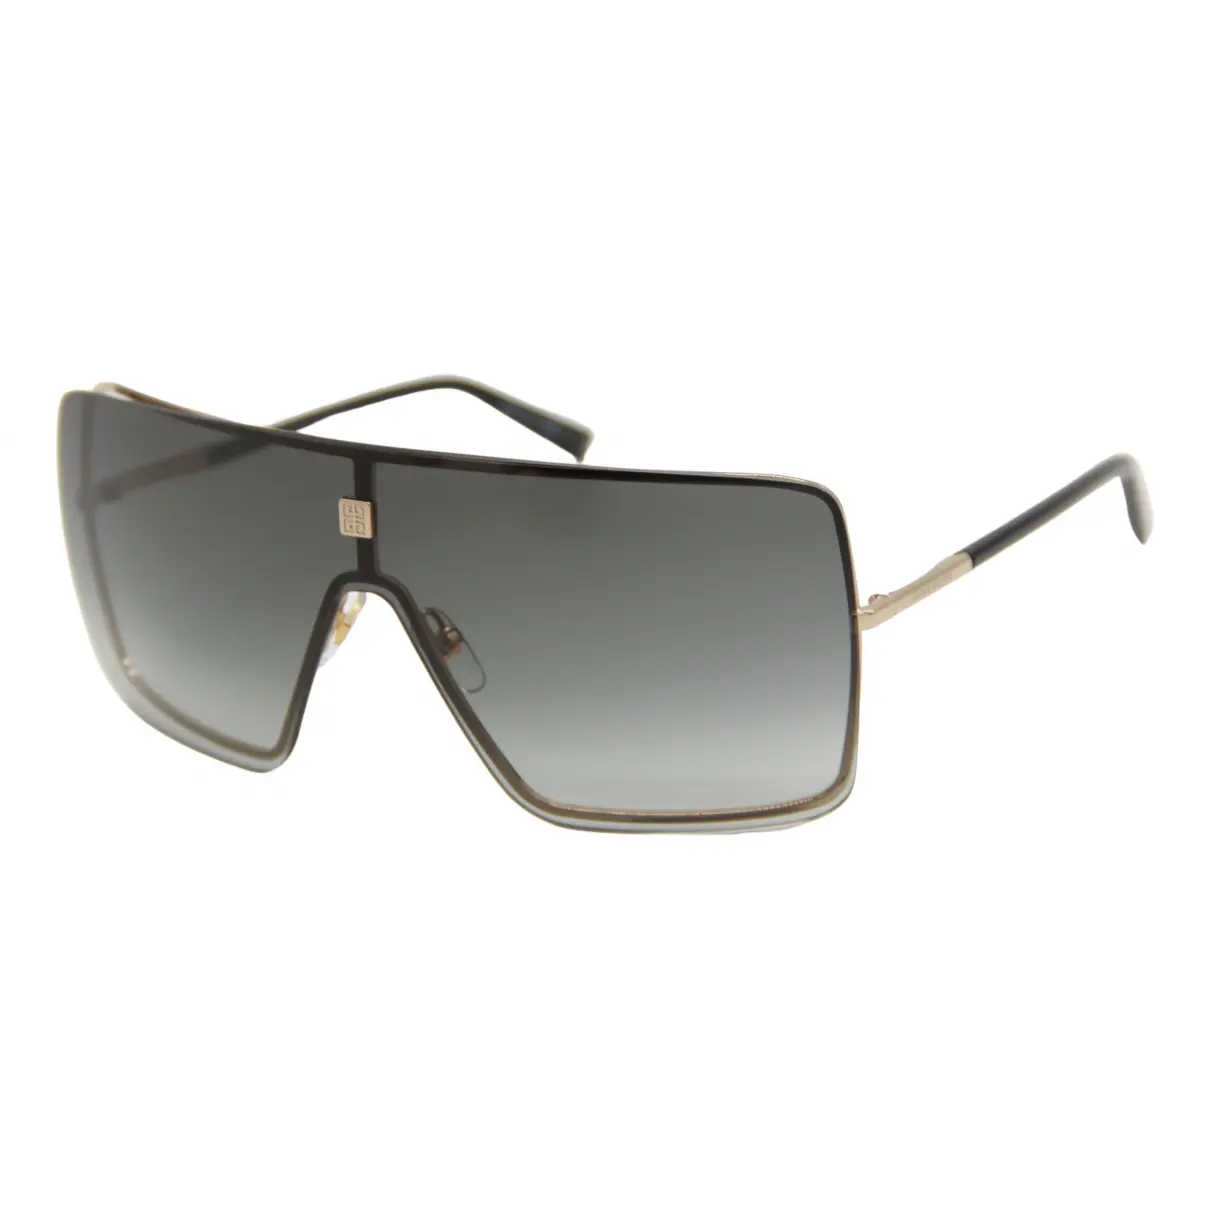 Buy Givenchy Sunglasses online